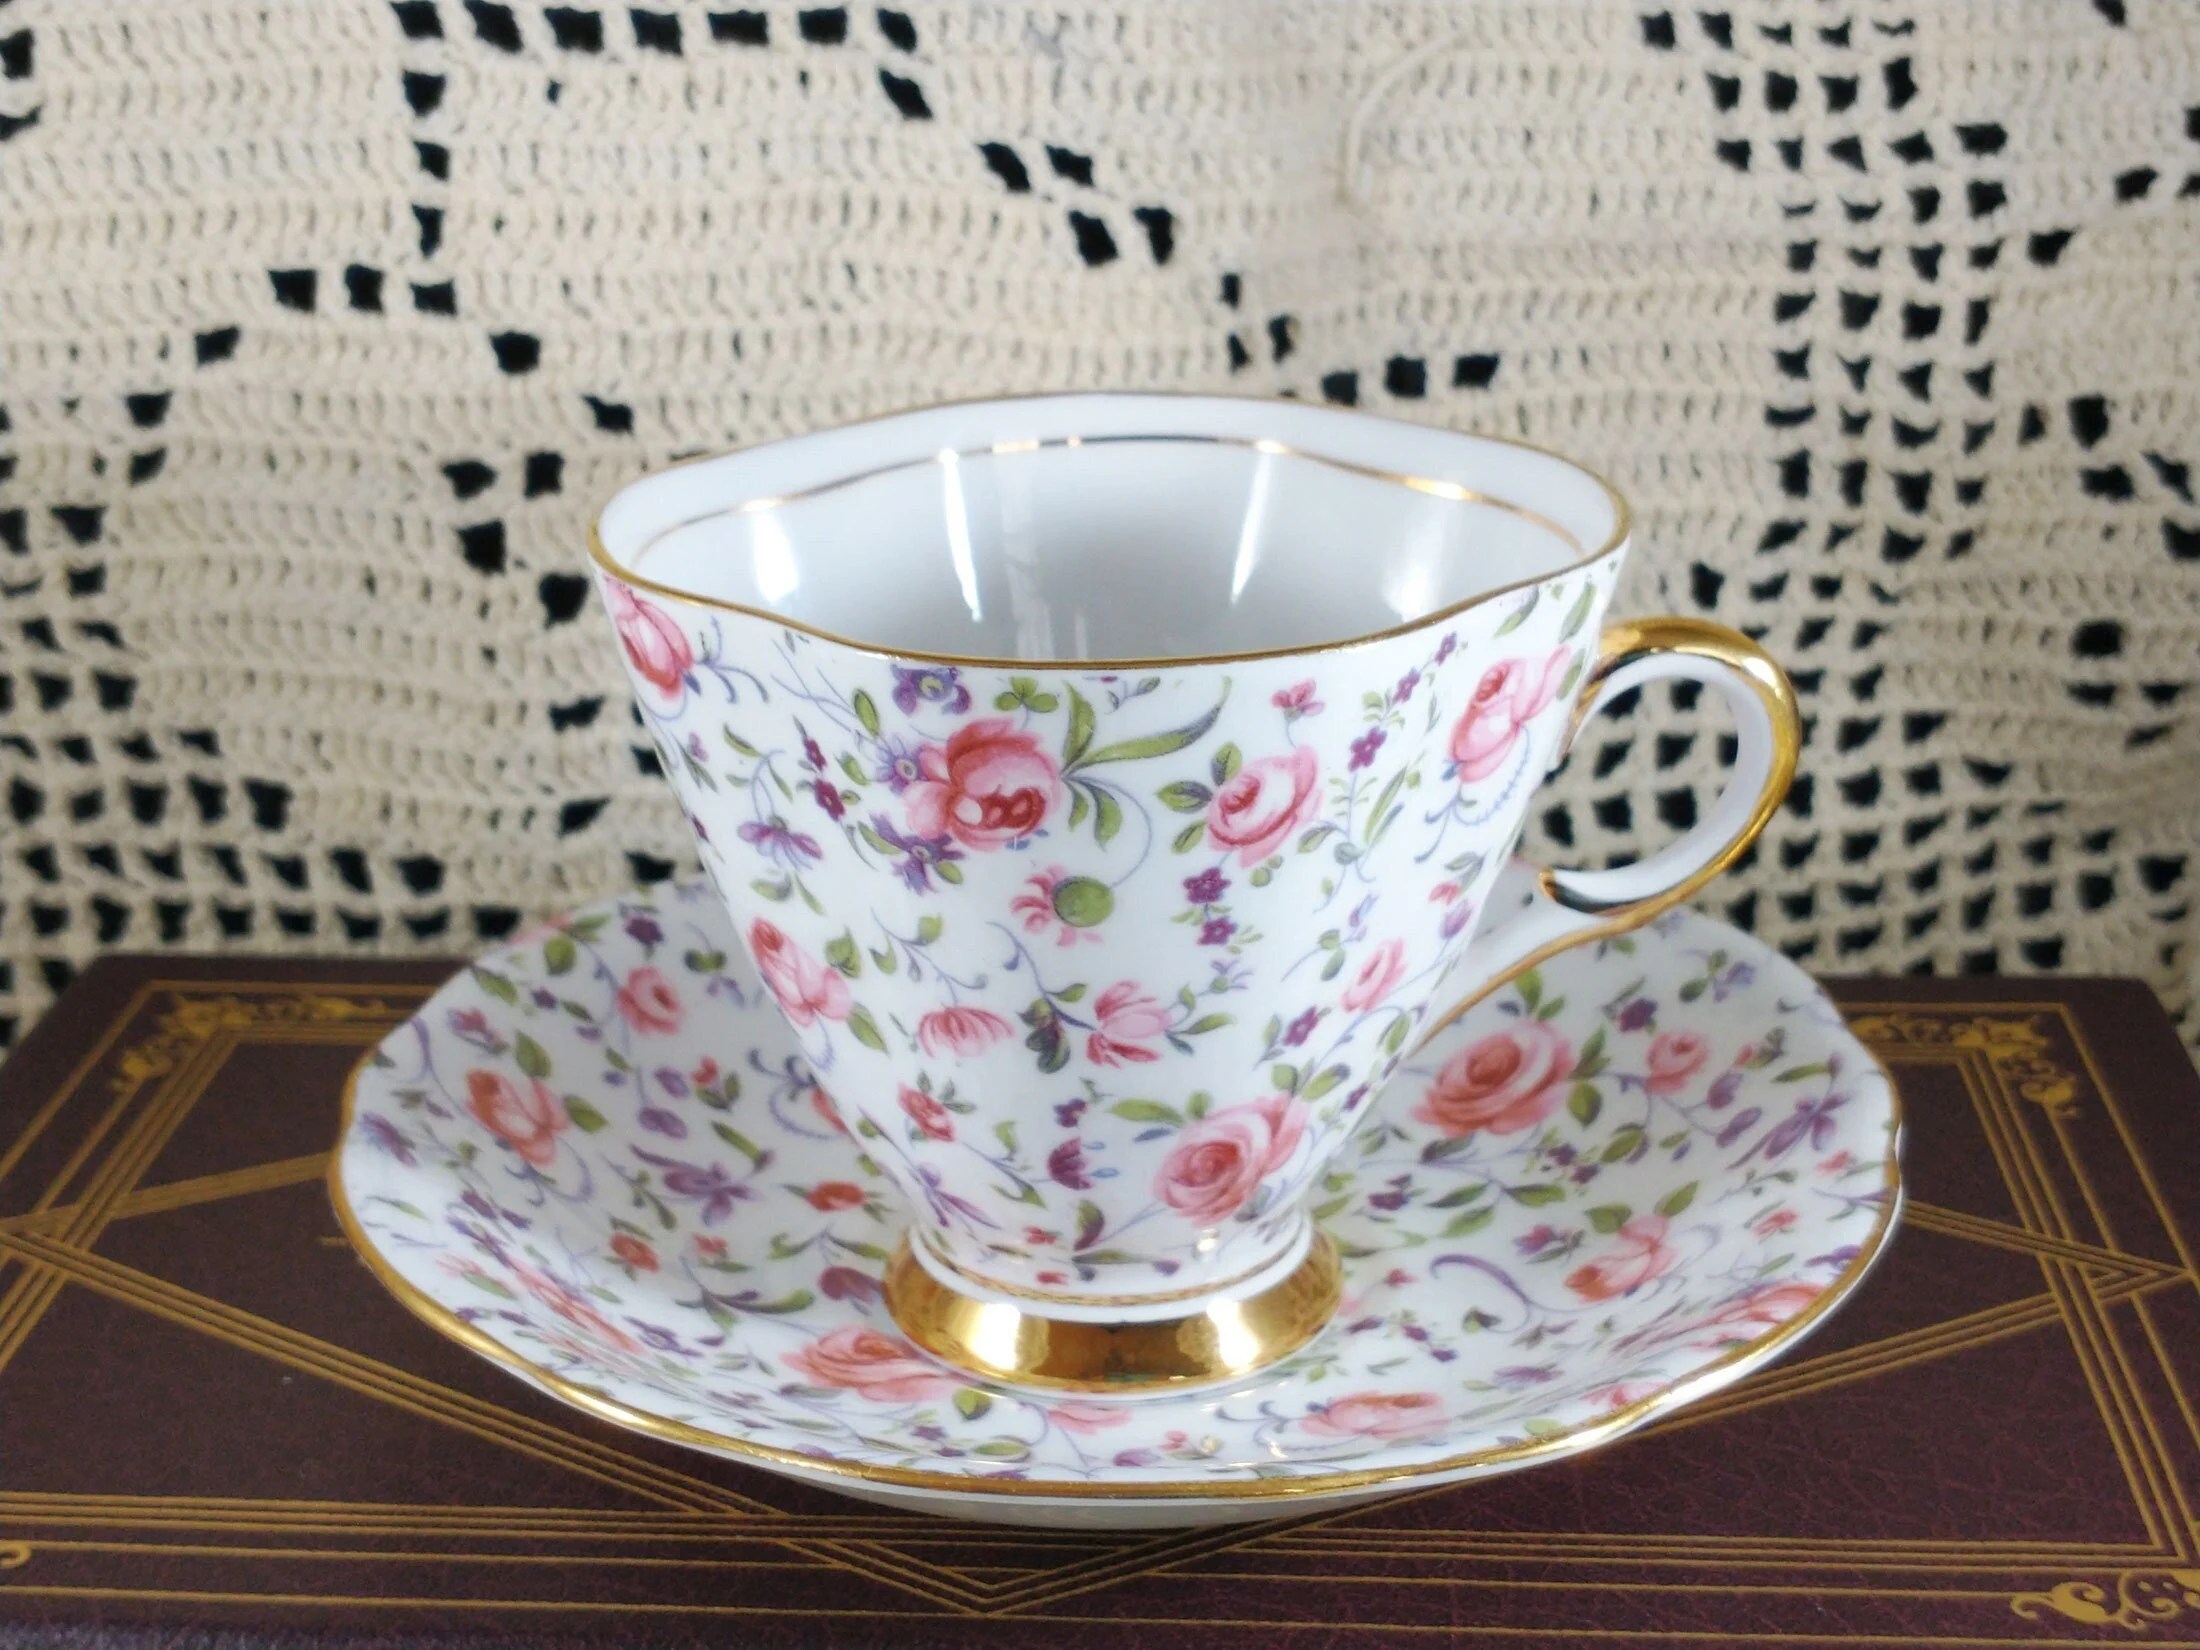 Clarence Bone China England 1950s Pink Roses Lavender Flowers Floral Chintz Tea Cup & Saucer CN1 Pattern -  Farmhouse, Country, Cottage